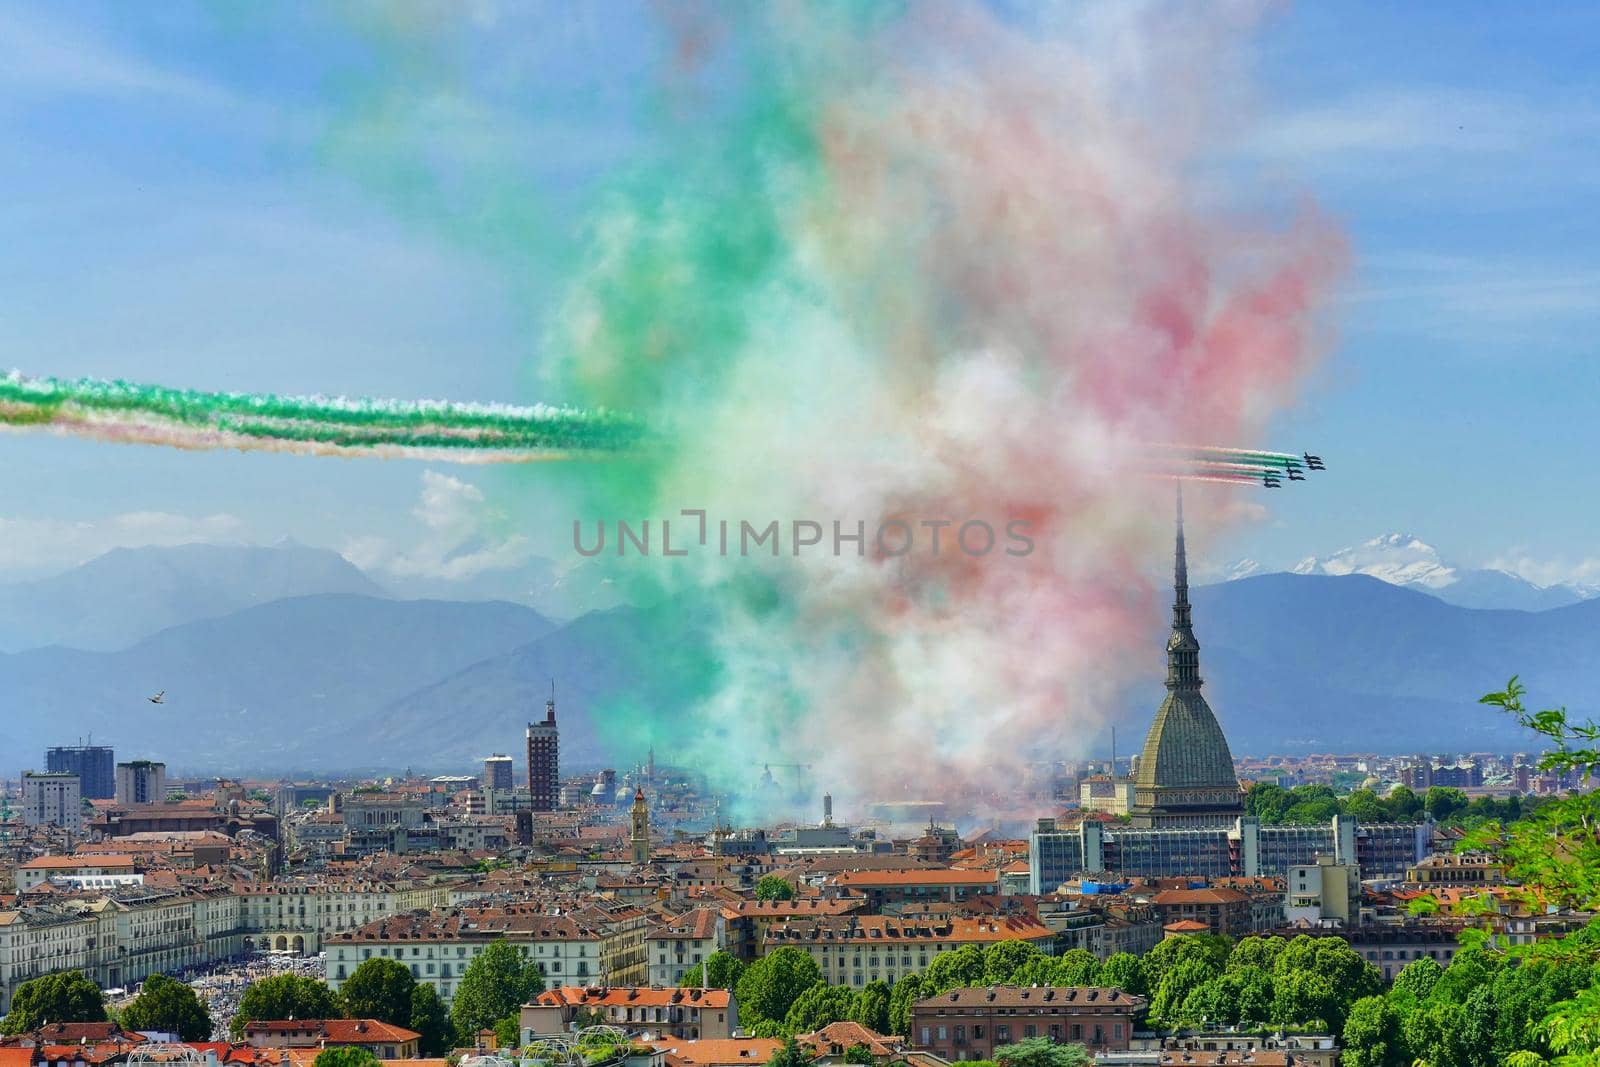 Acrobatic squad "Frecce Tricolori" flying over the city Turin Italy May 25 2020 by lemar